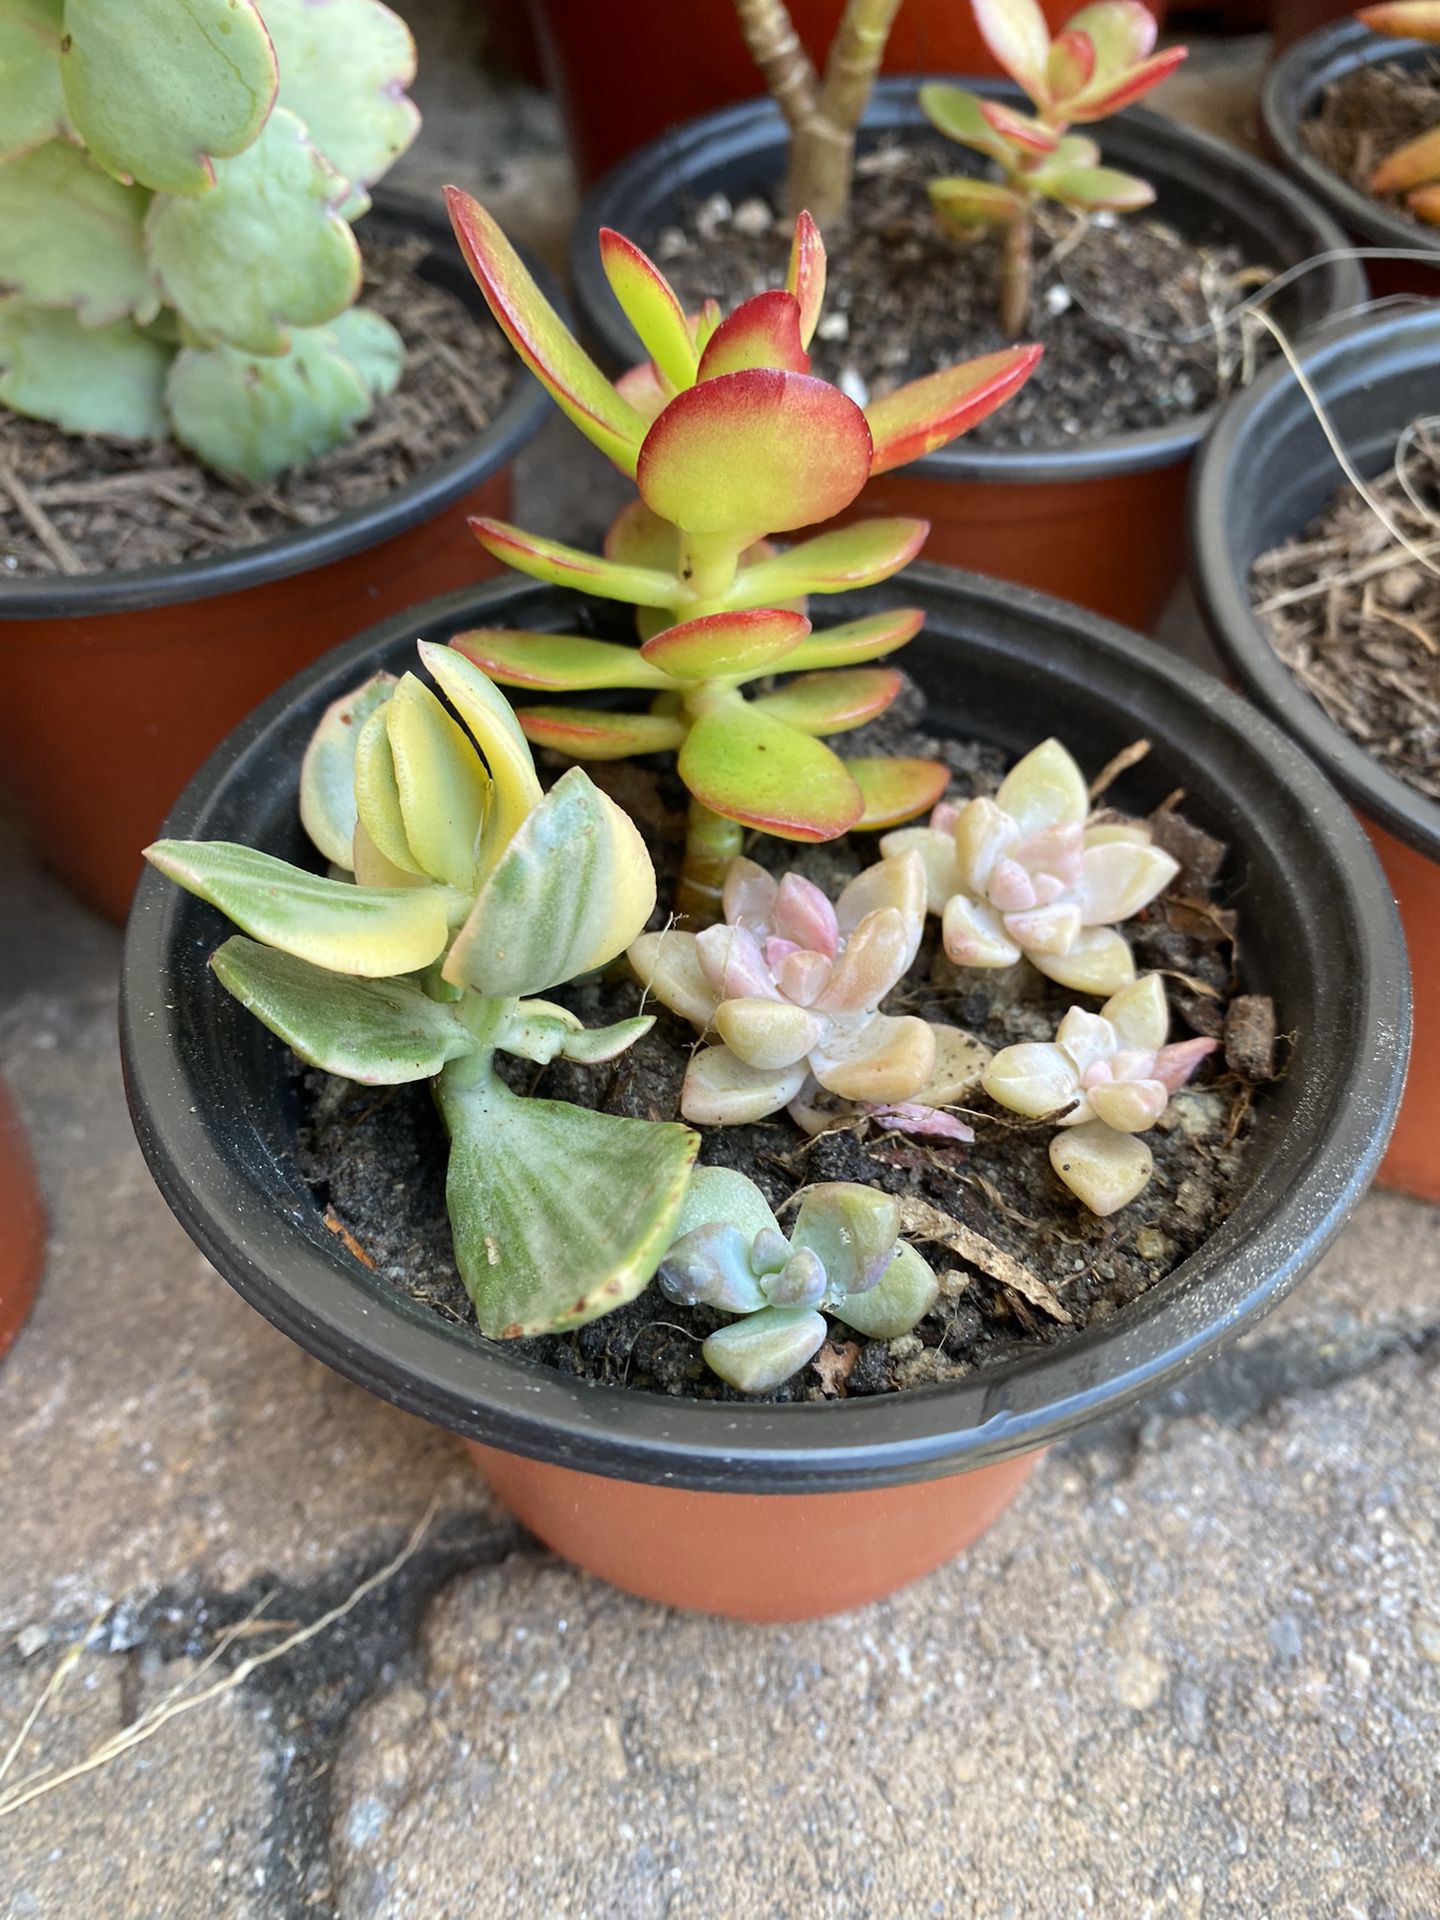 4 Inch Pot Succulent plants mix - includes 3 varieties - rooted ready to be planted or displayed 